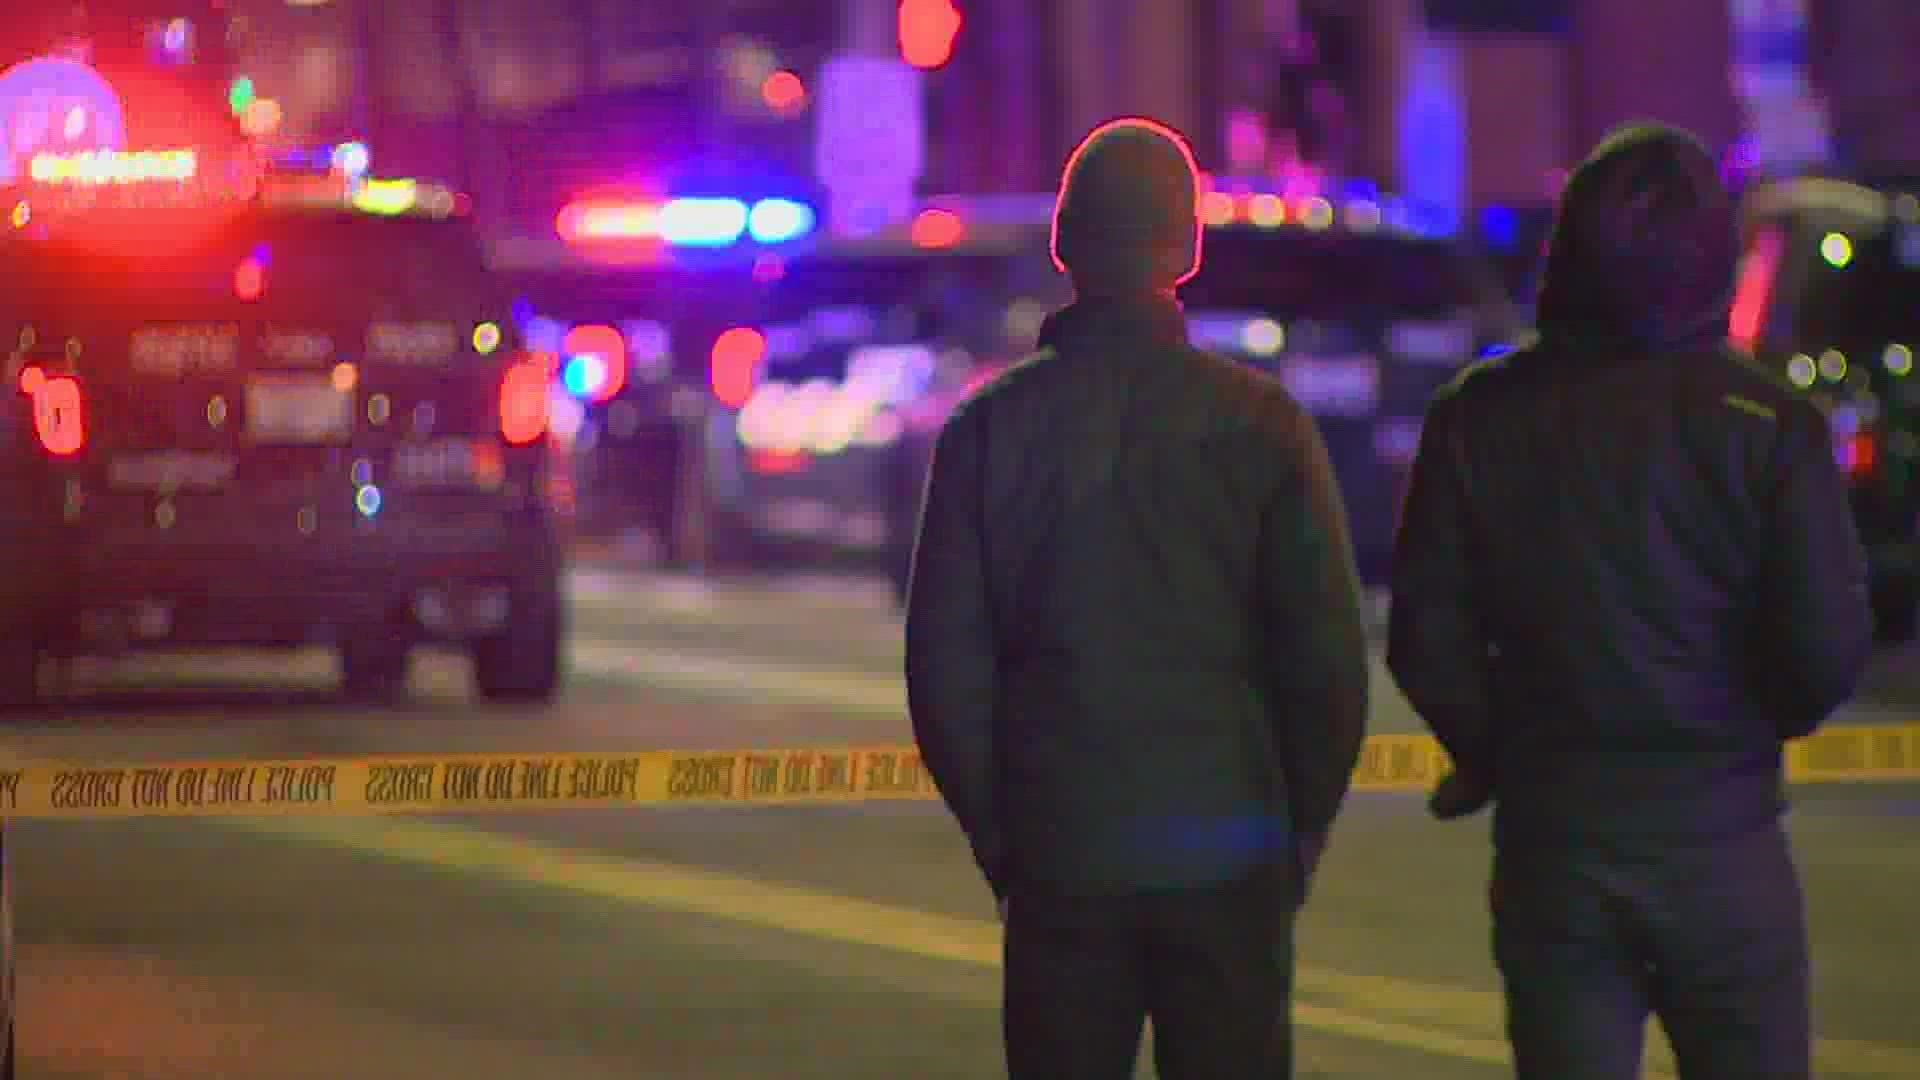 Seattle police shot and killed a man armed with a long gun outside the Federal Office Building in downtown Seattle Saturday night.